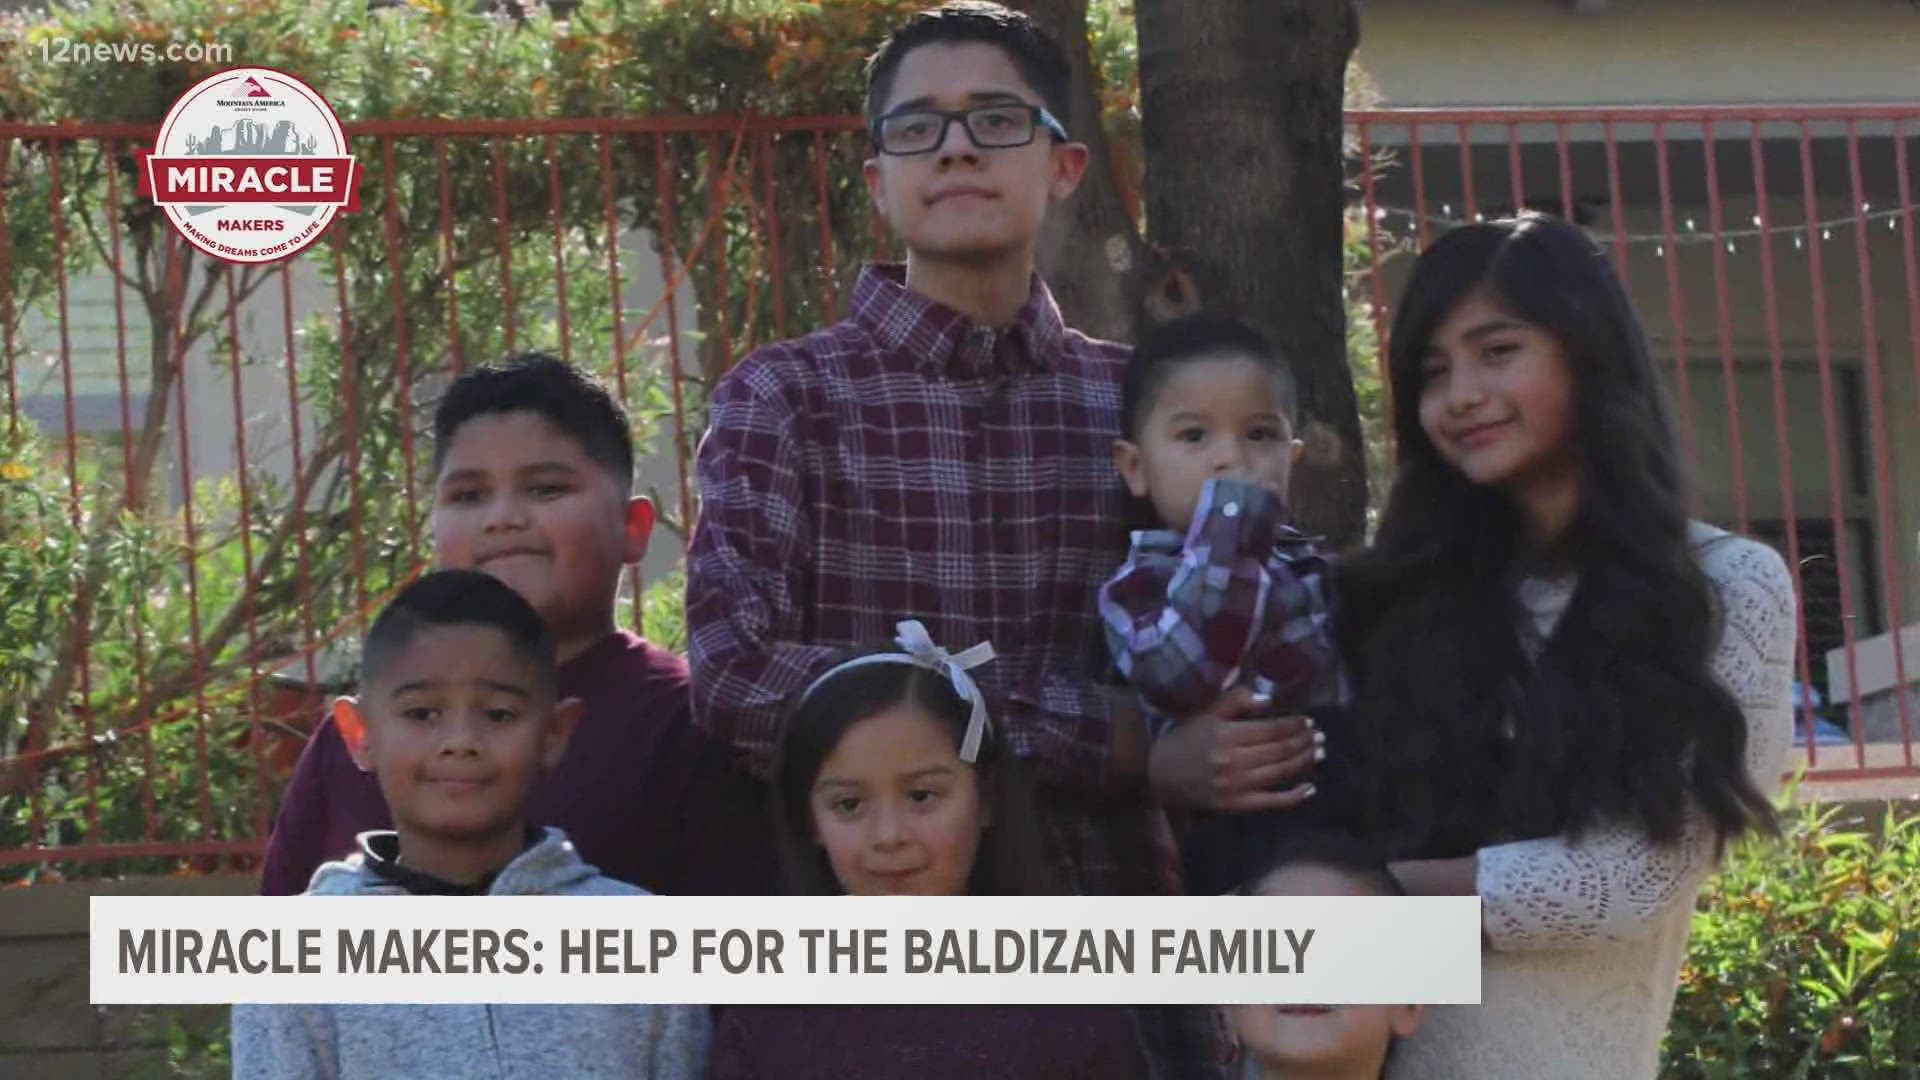 The Baldizans are a family of nine who have been going through homeowner hell for years. So the Miracle Makers gave them a helping hand.